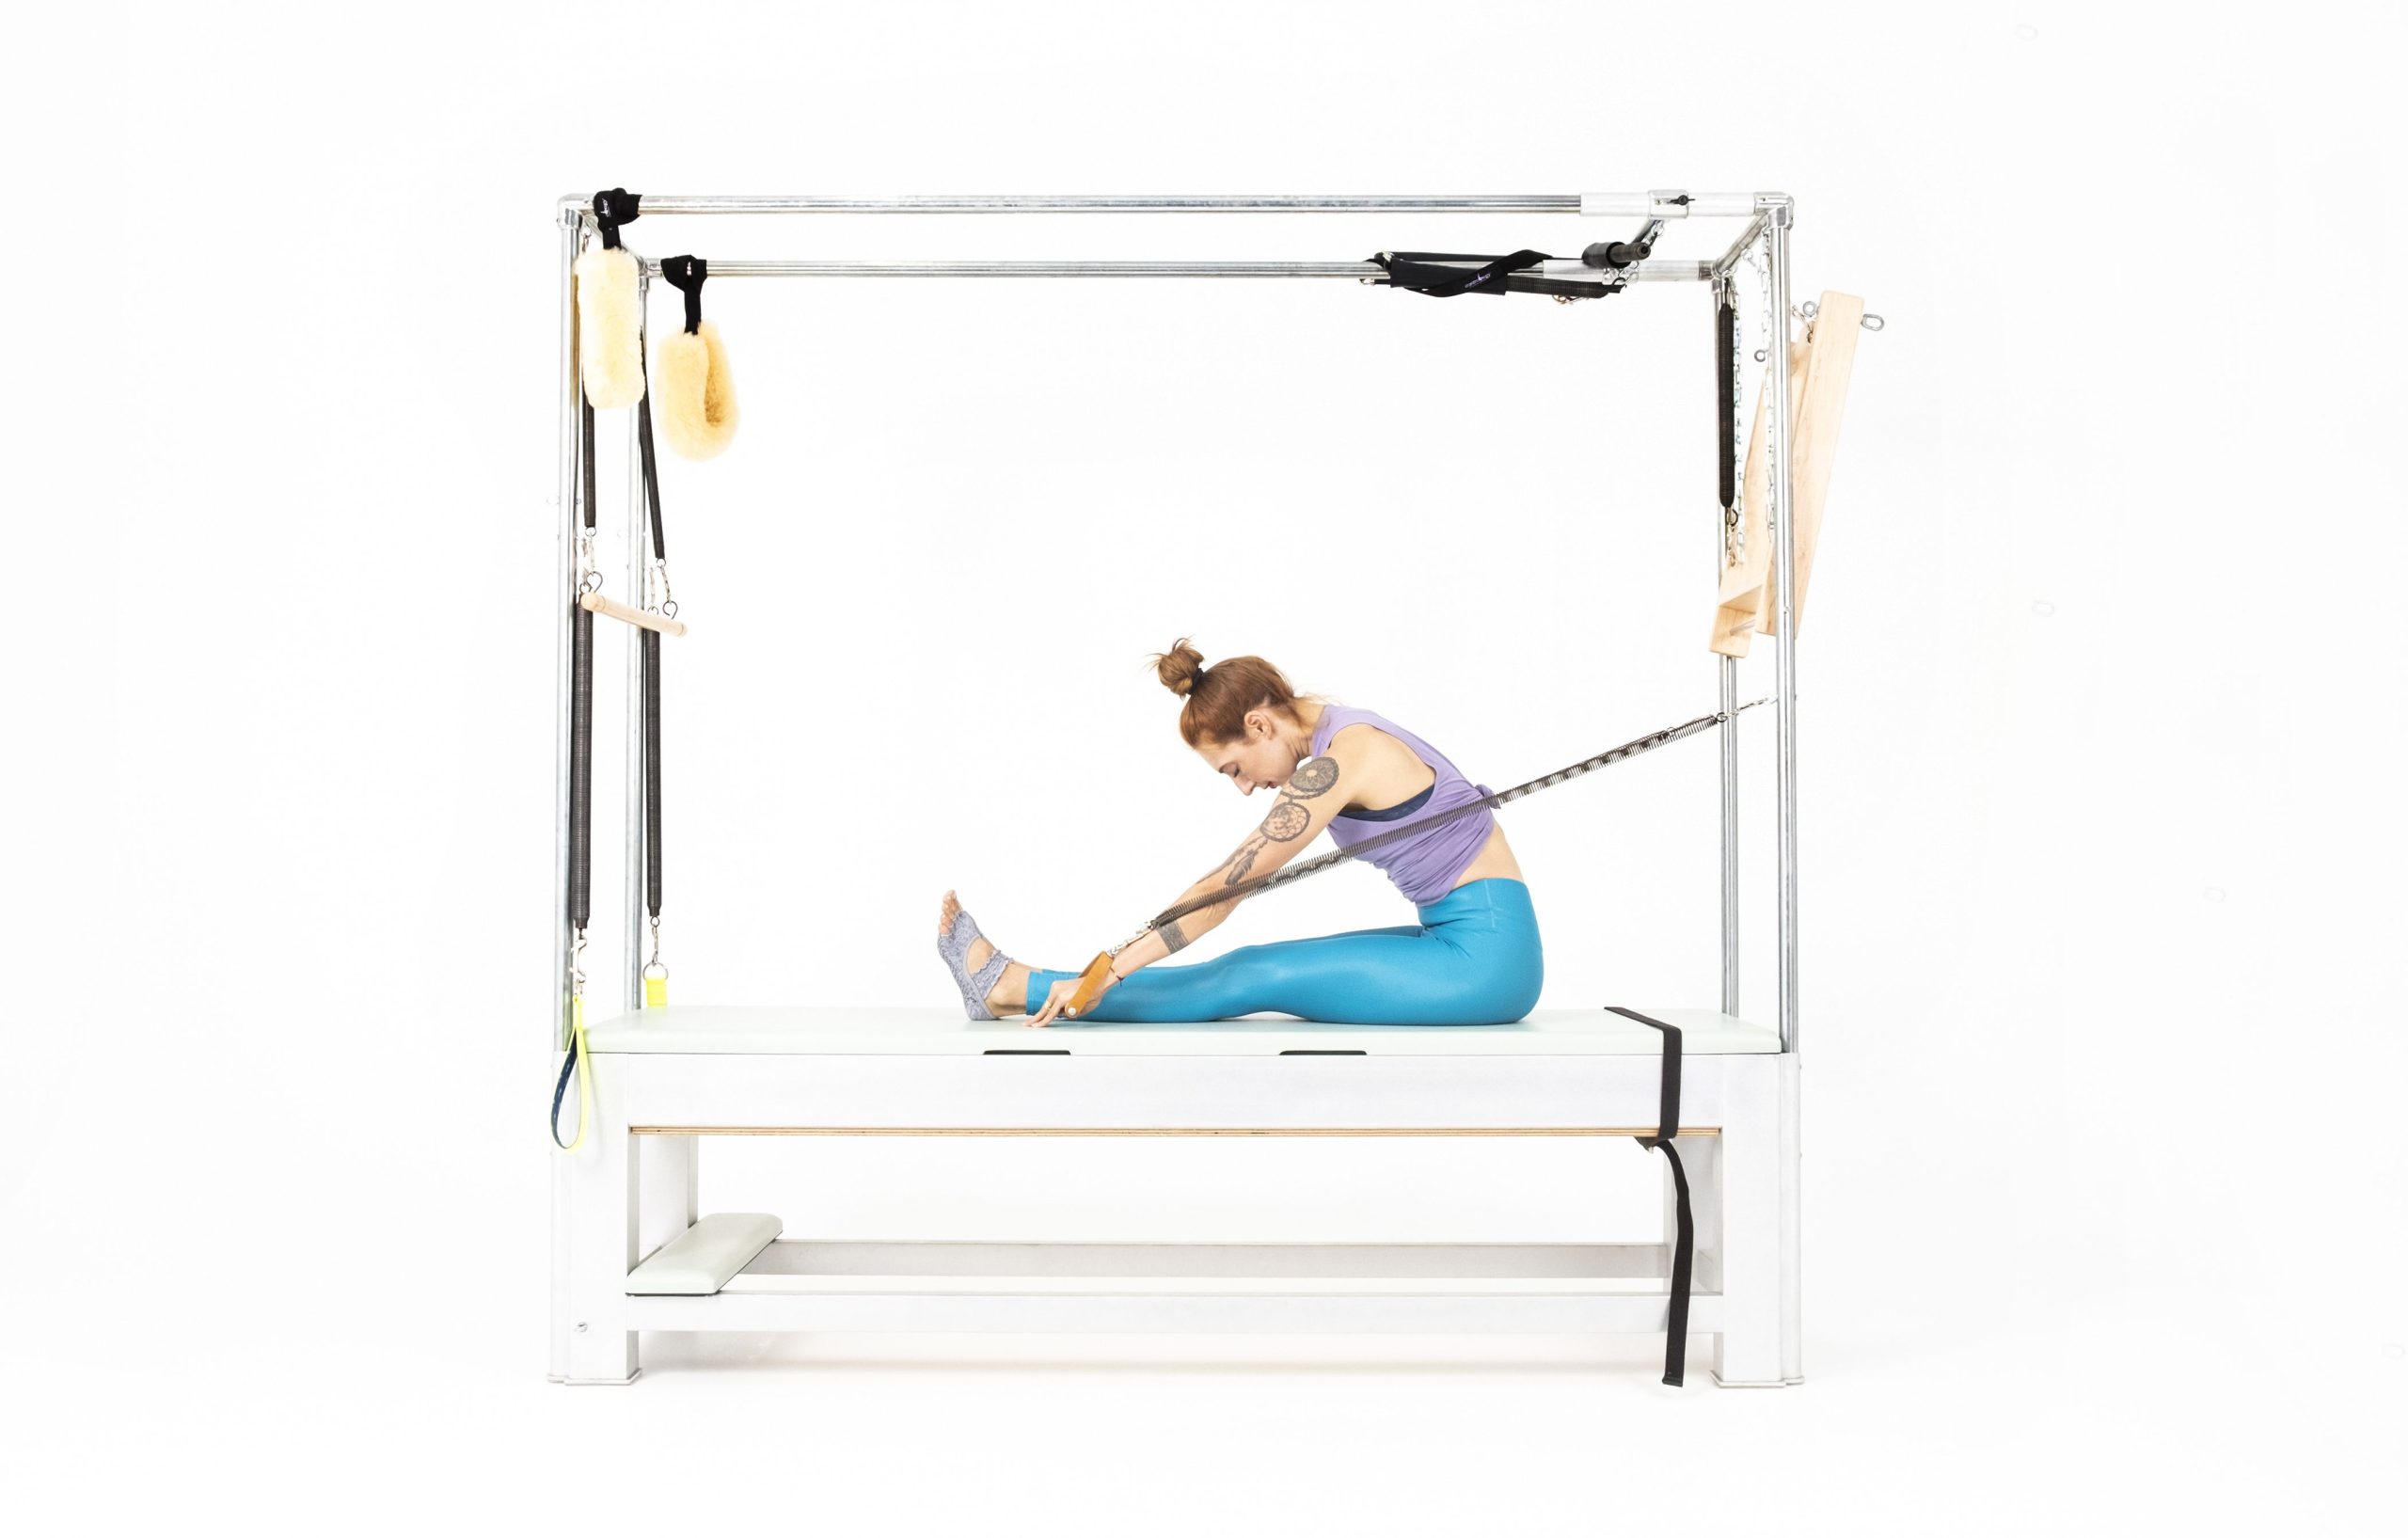 Rowing 4 From the Hips with Arm Springs on the Cadillac or Tower Online Pilates Classes